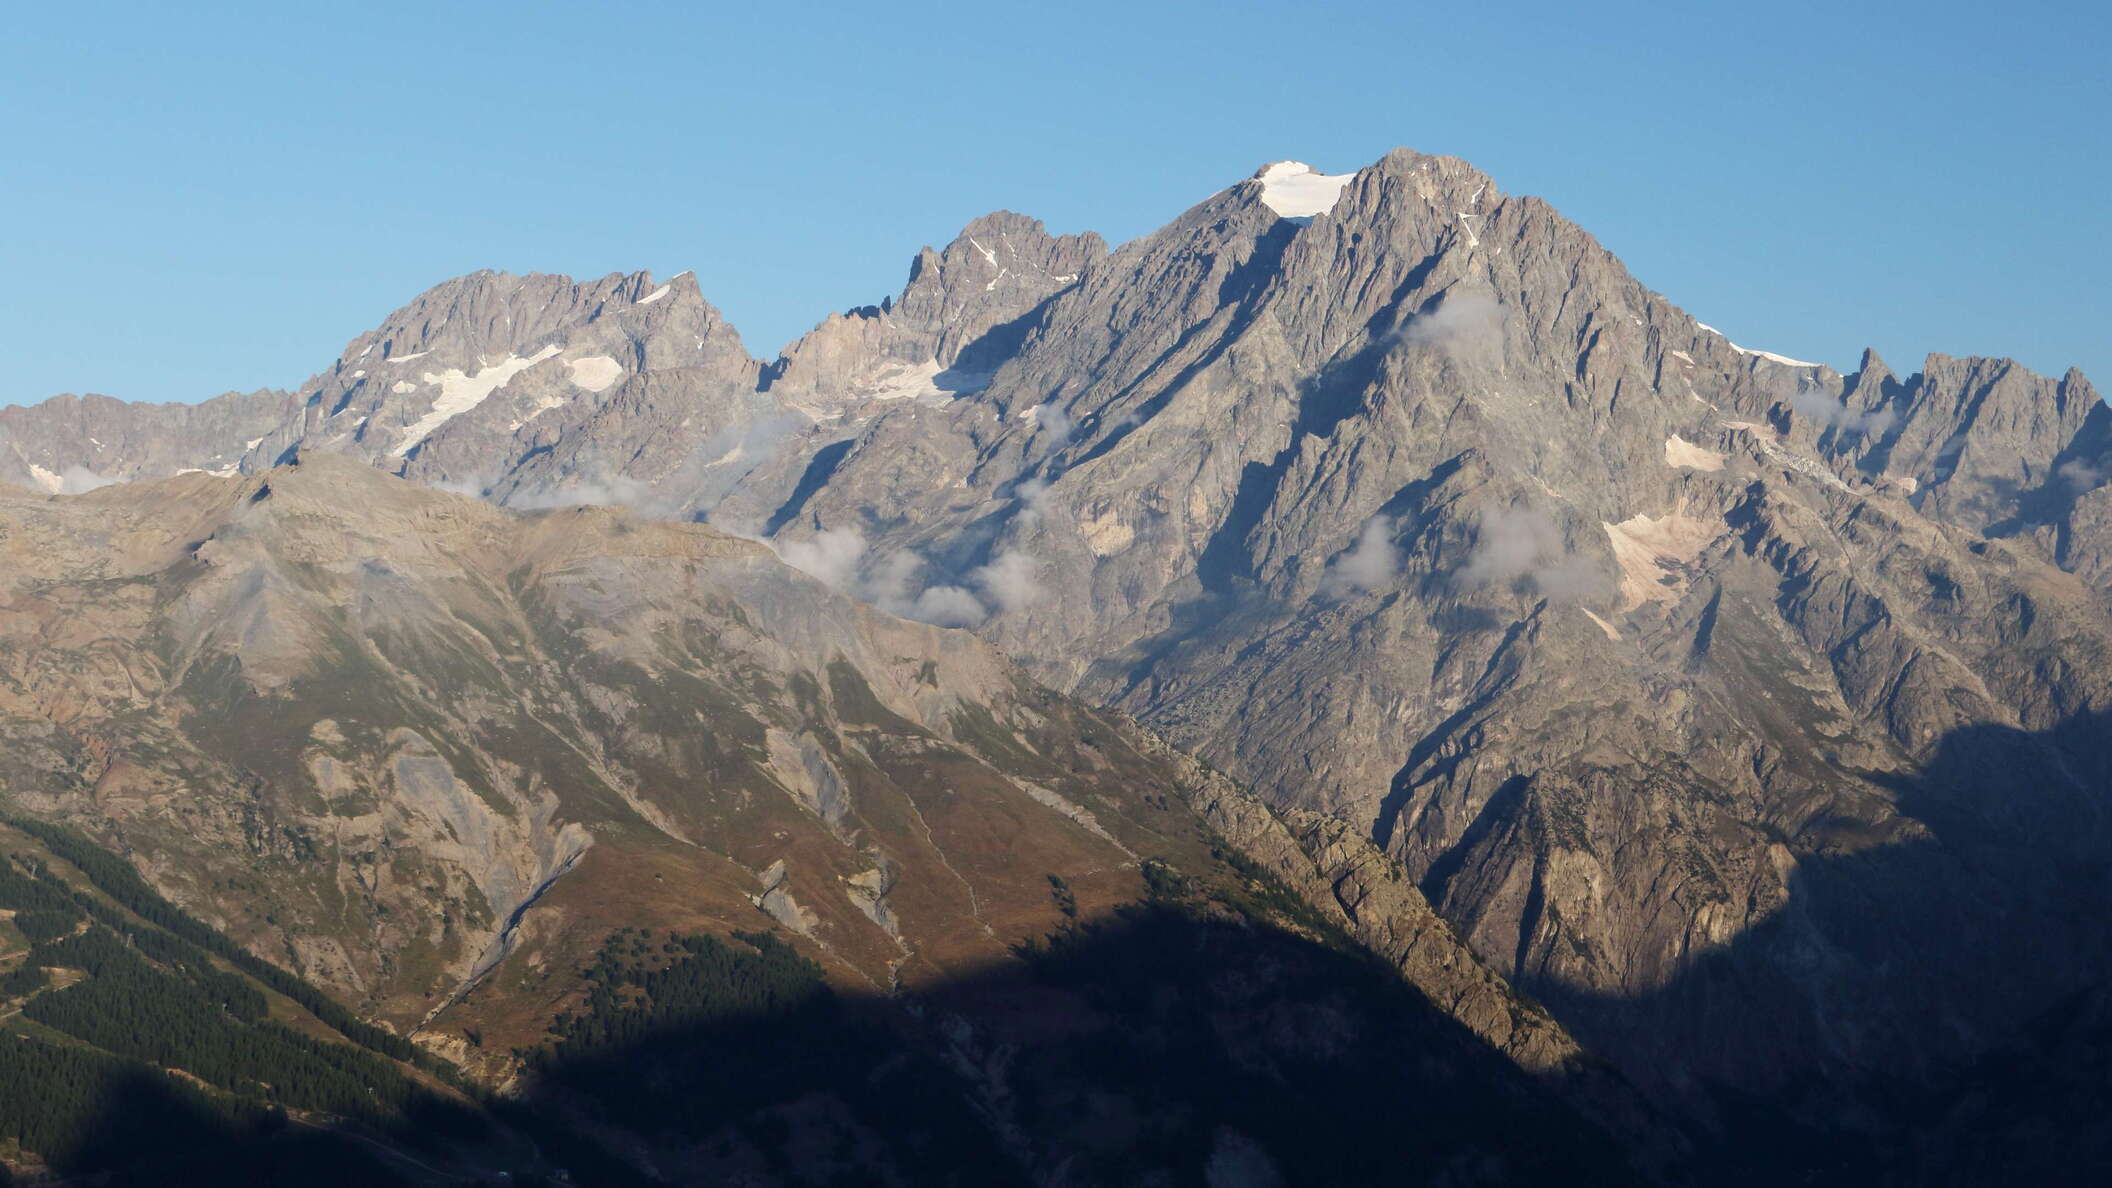 Dauphiné Alps | Ailefroide and Mont Pelvoux